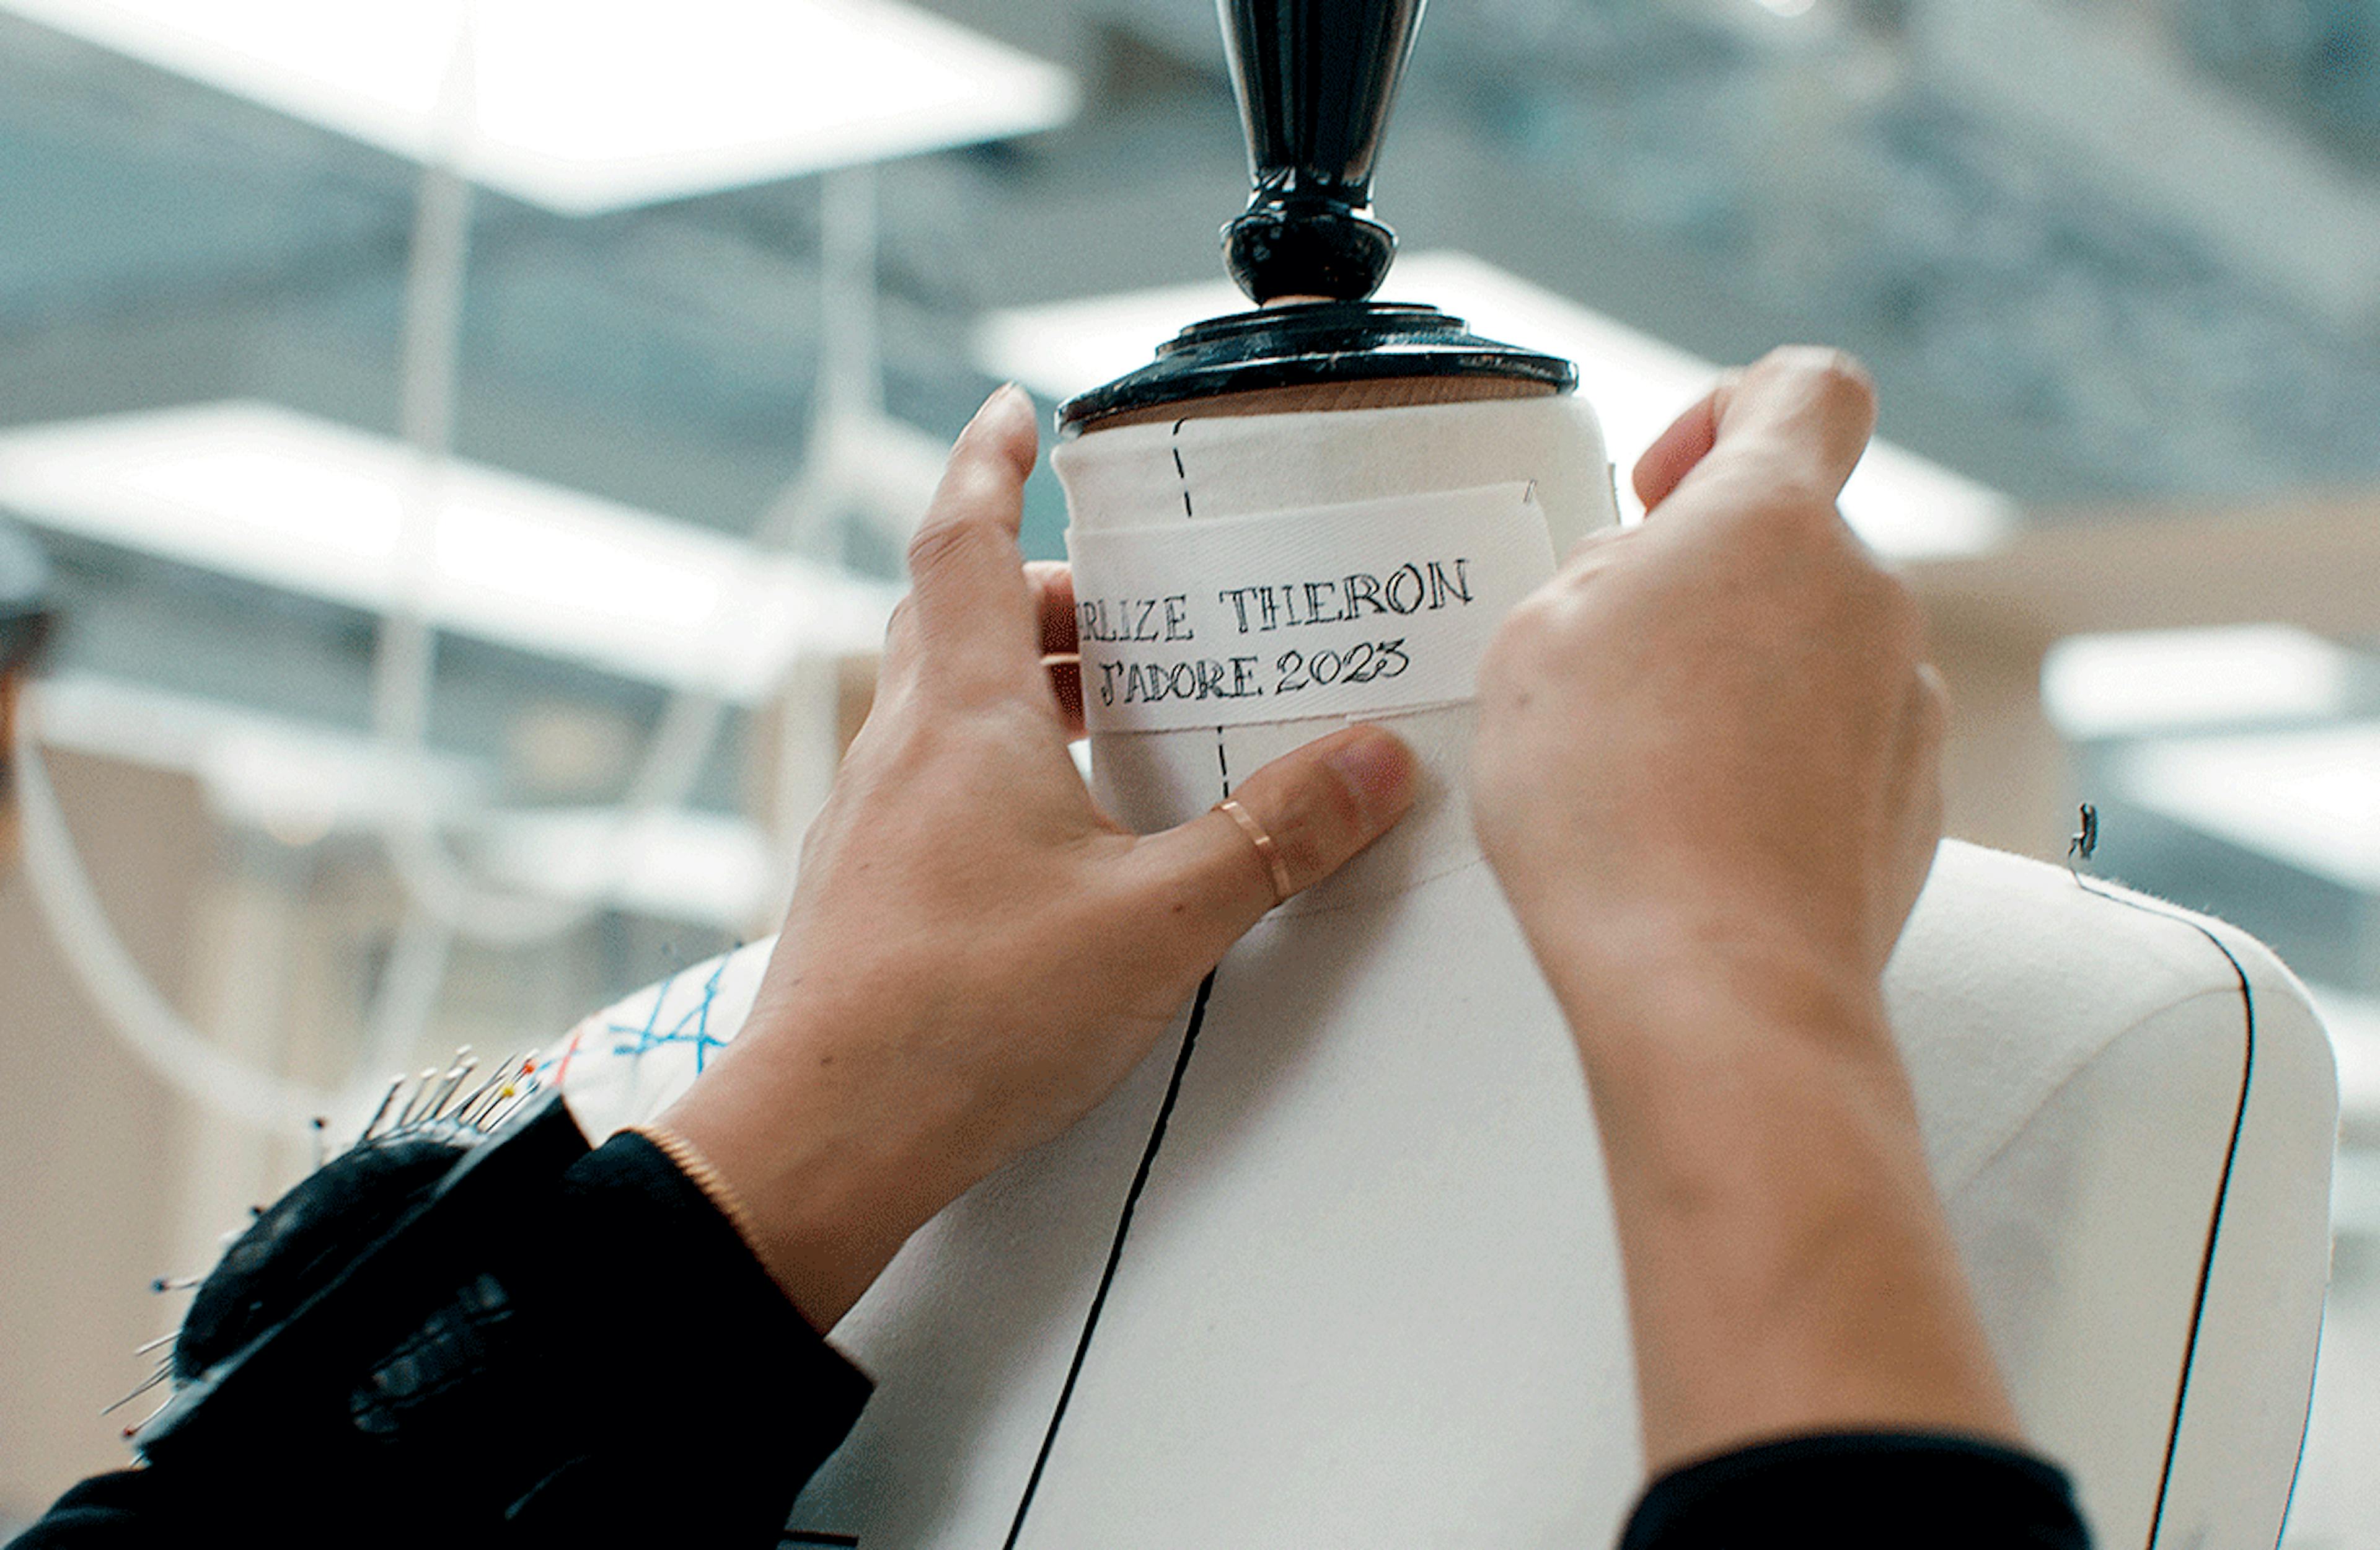 Visuals “Inside the Dream”: a behind the scenes look at creating an iconic Dior perfume